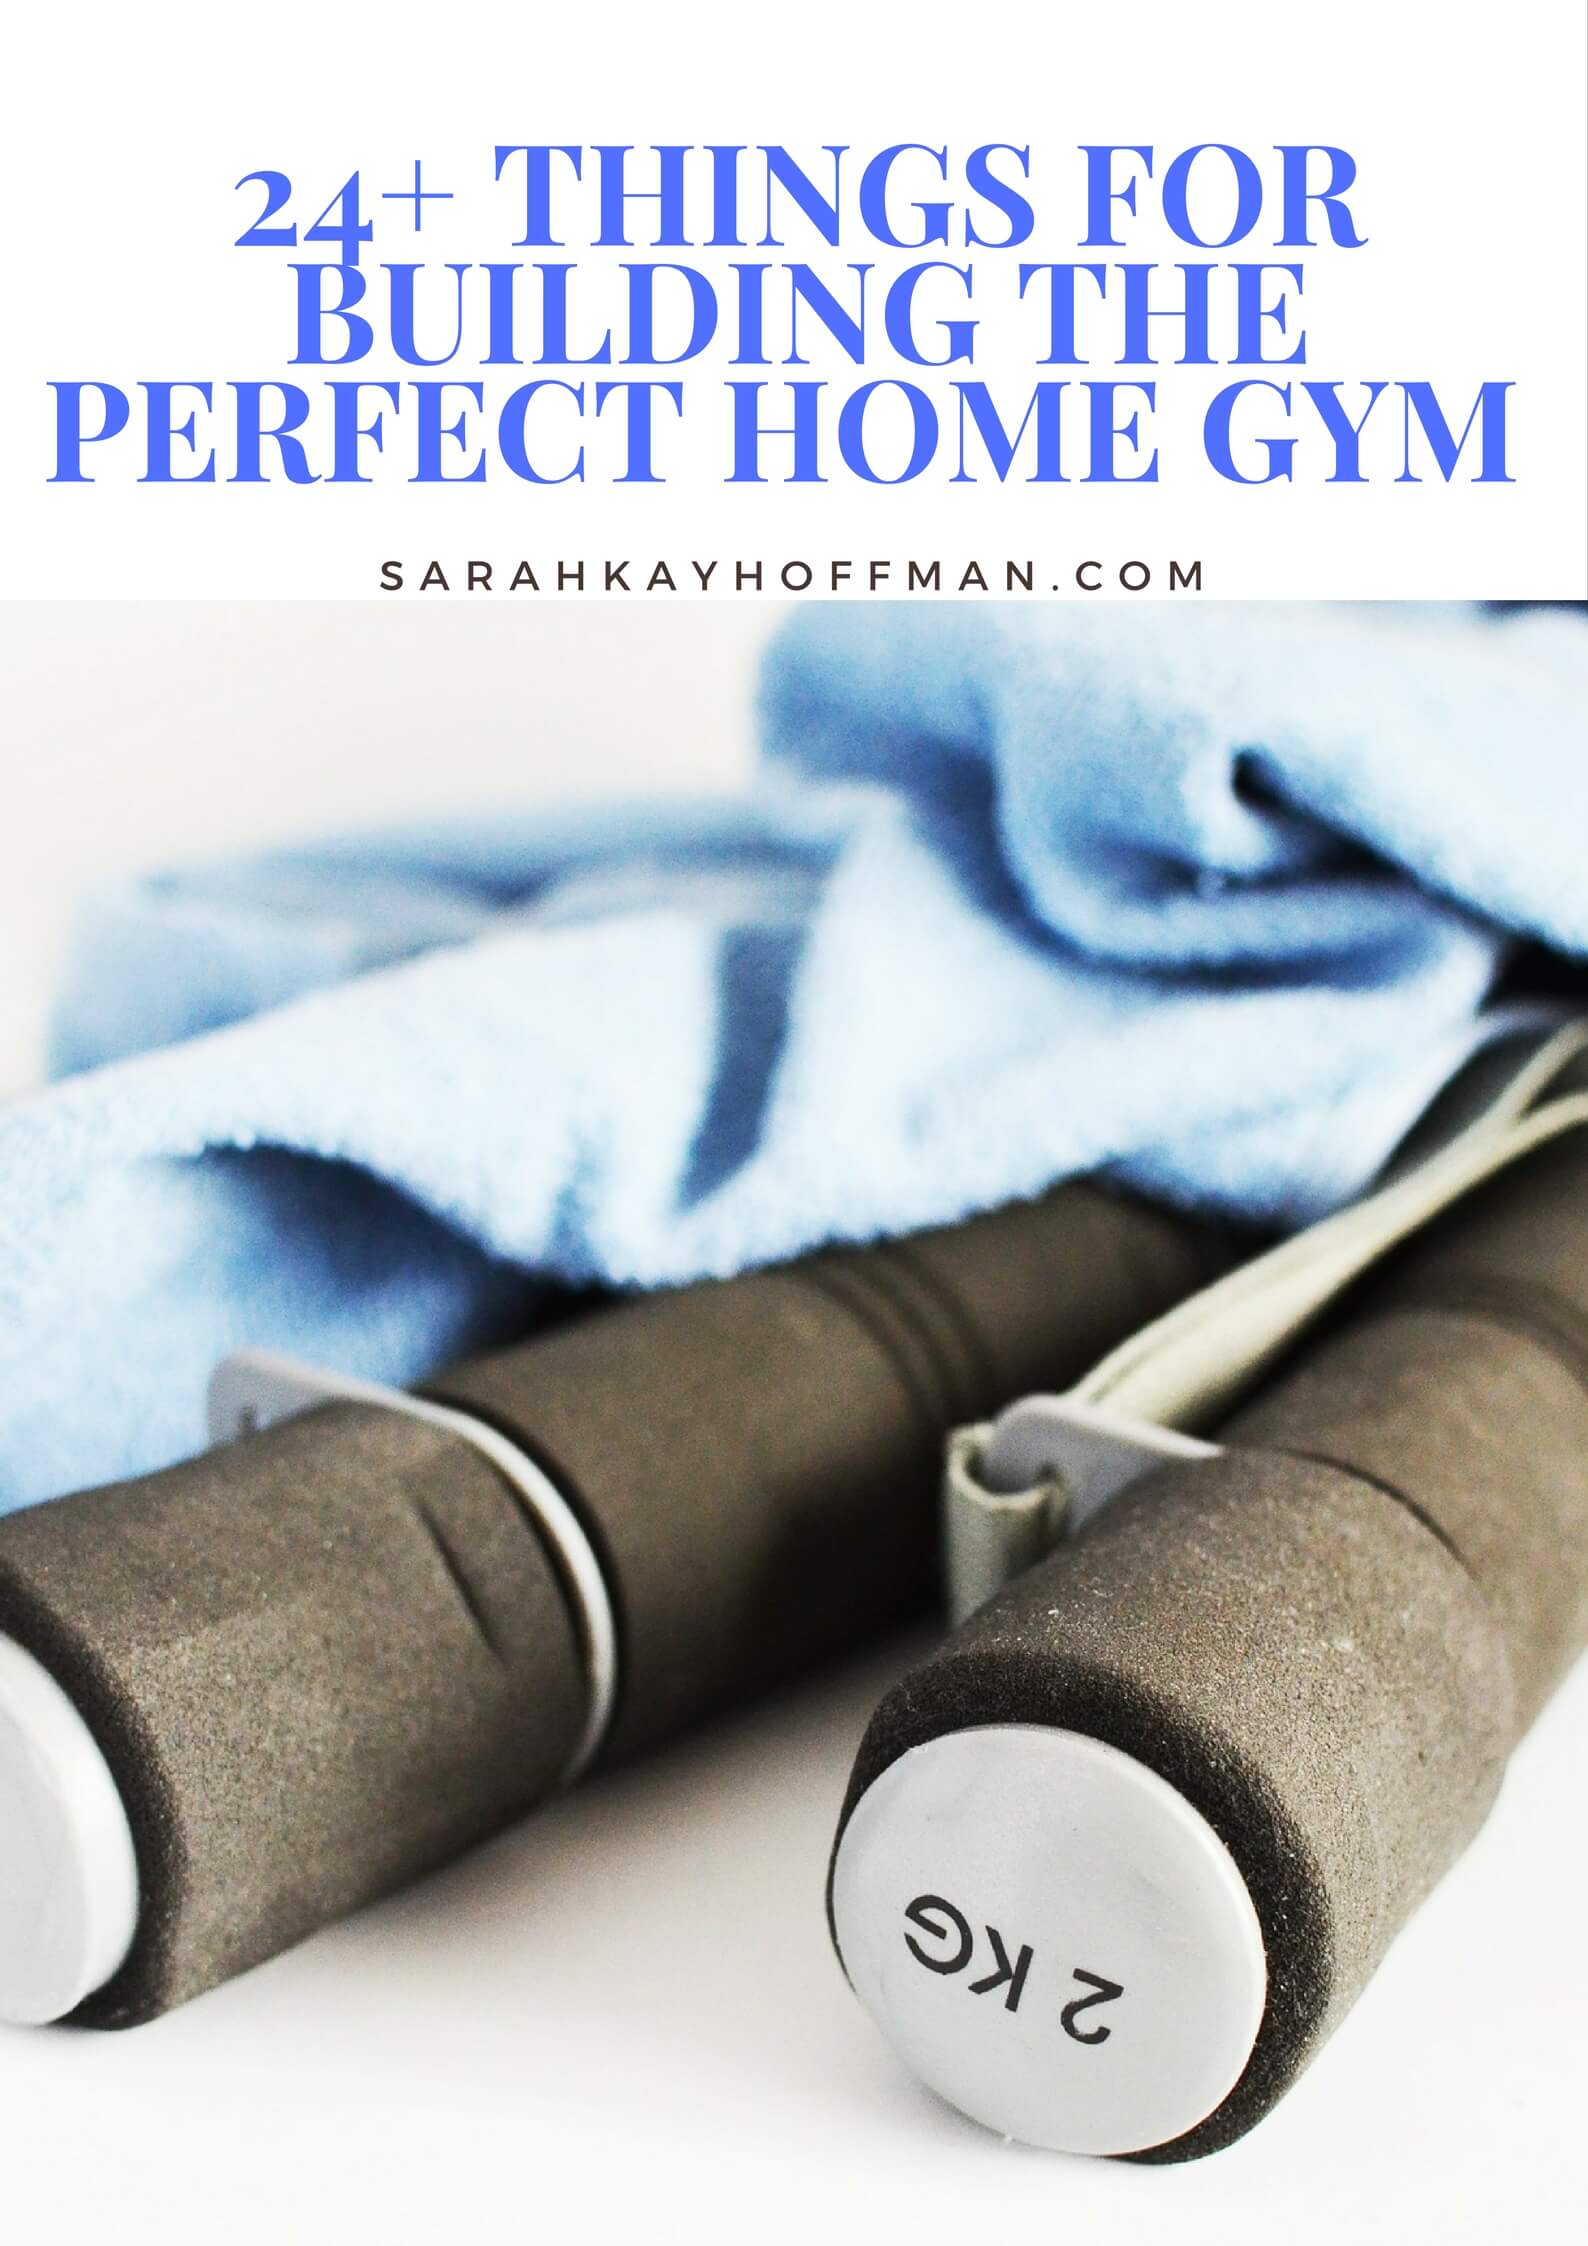 How to Build the Perfect Home Gym 24+ Things for Building the Perfect Home Gym sarahkayhoffman.com